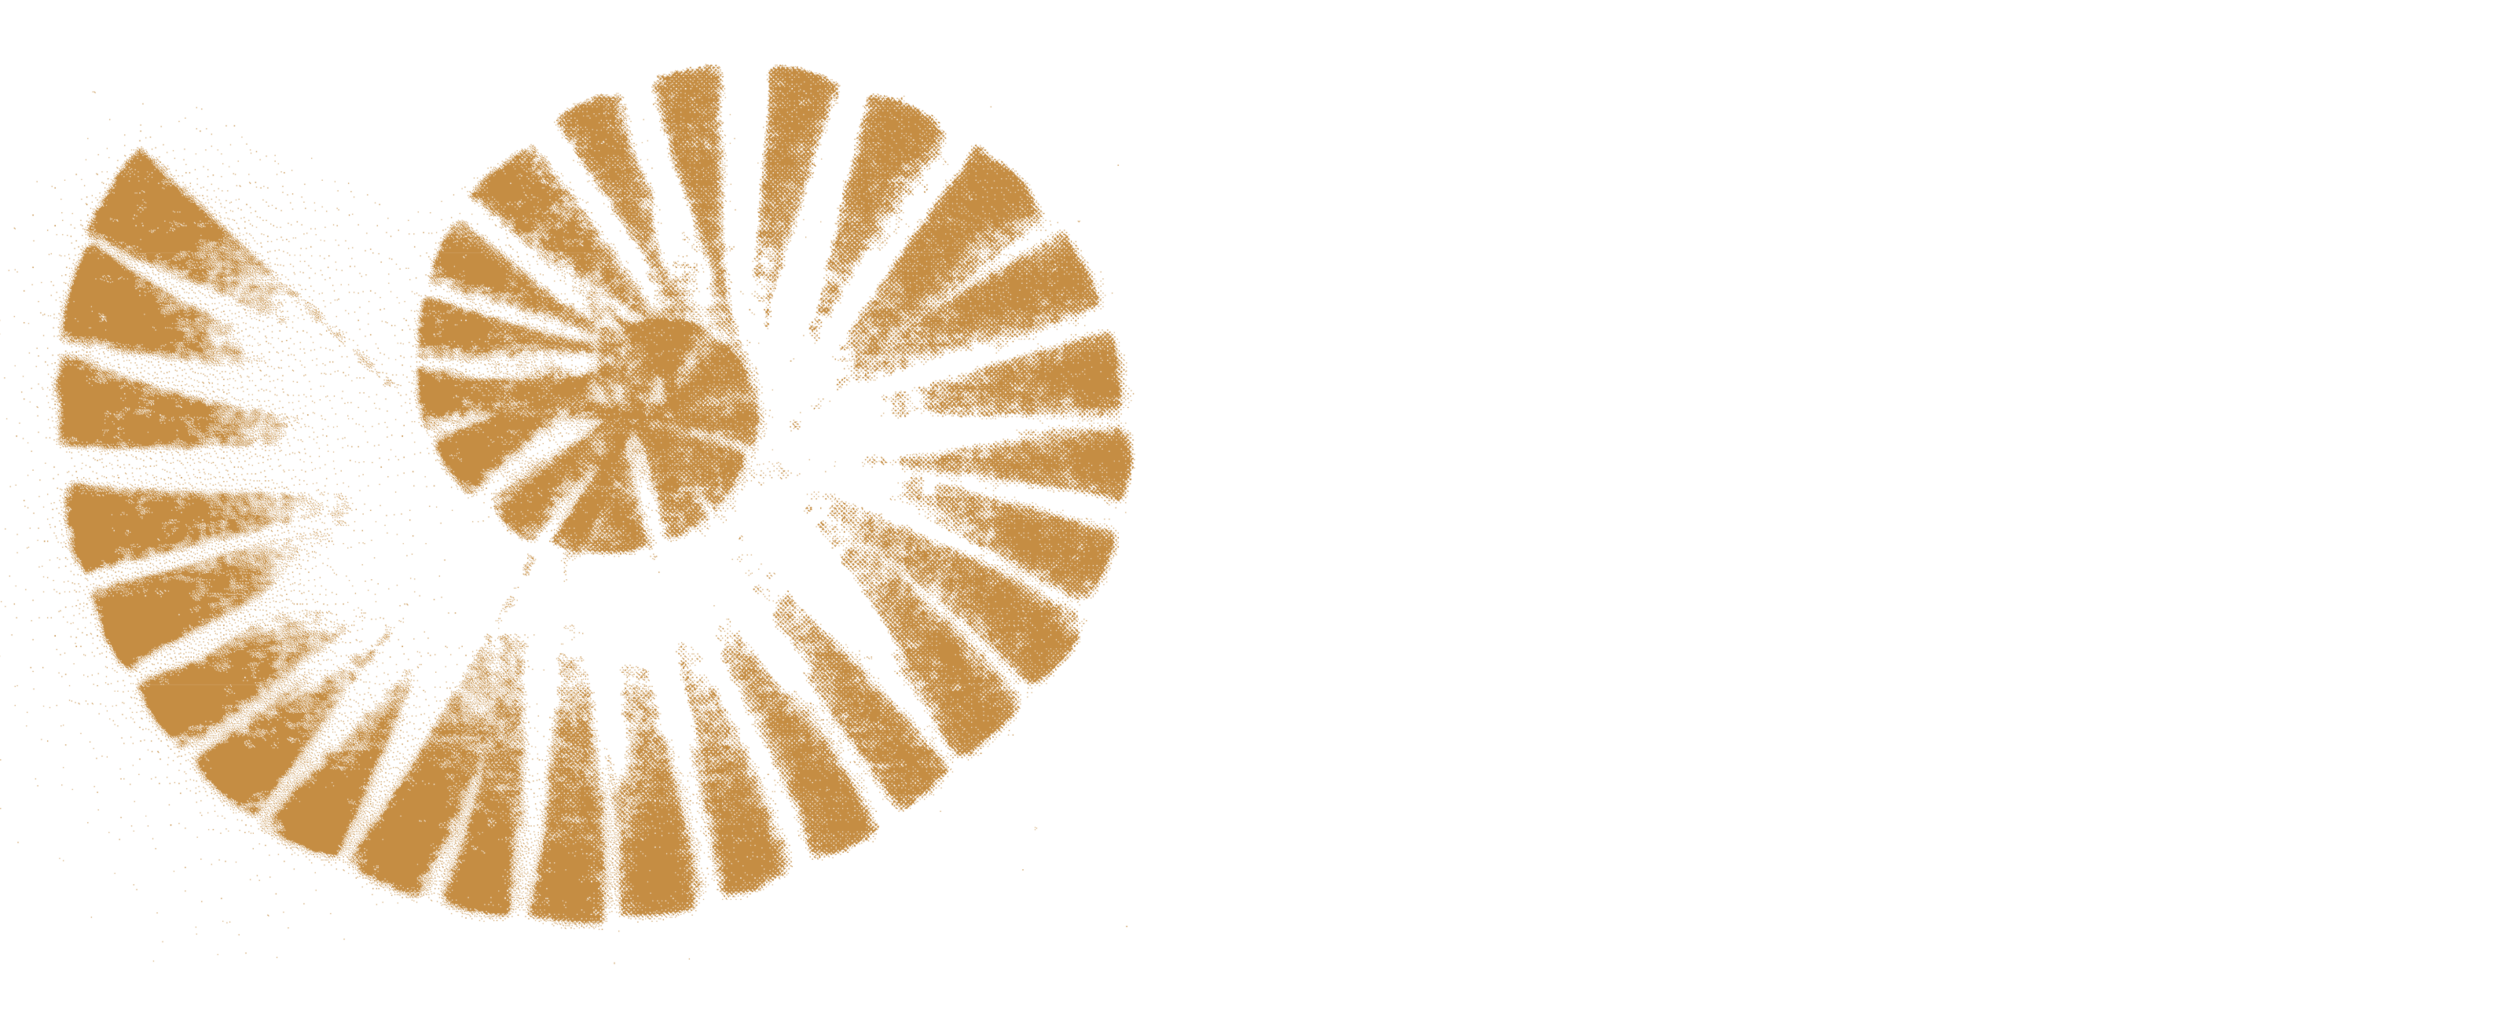 Institute for Sensorimotor Art Therapy &amp; School for Initiatic Art Therapy by Cornelia Elbrecht